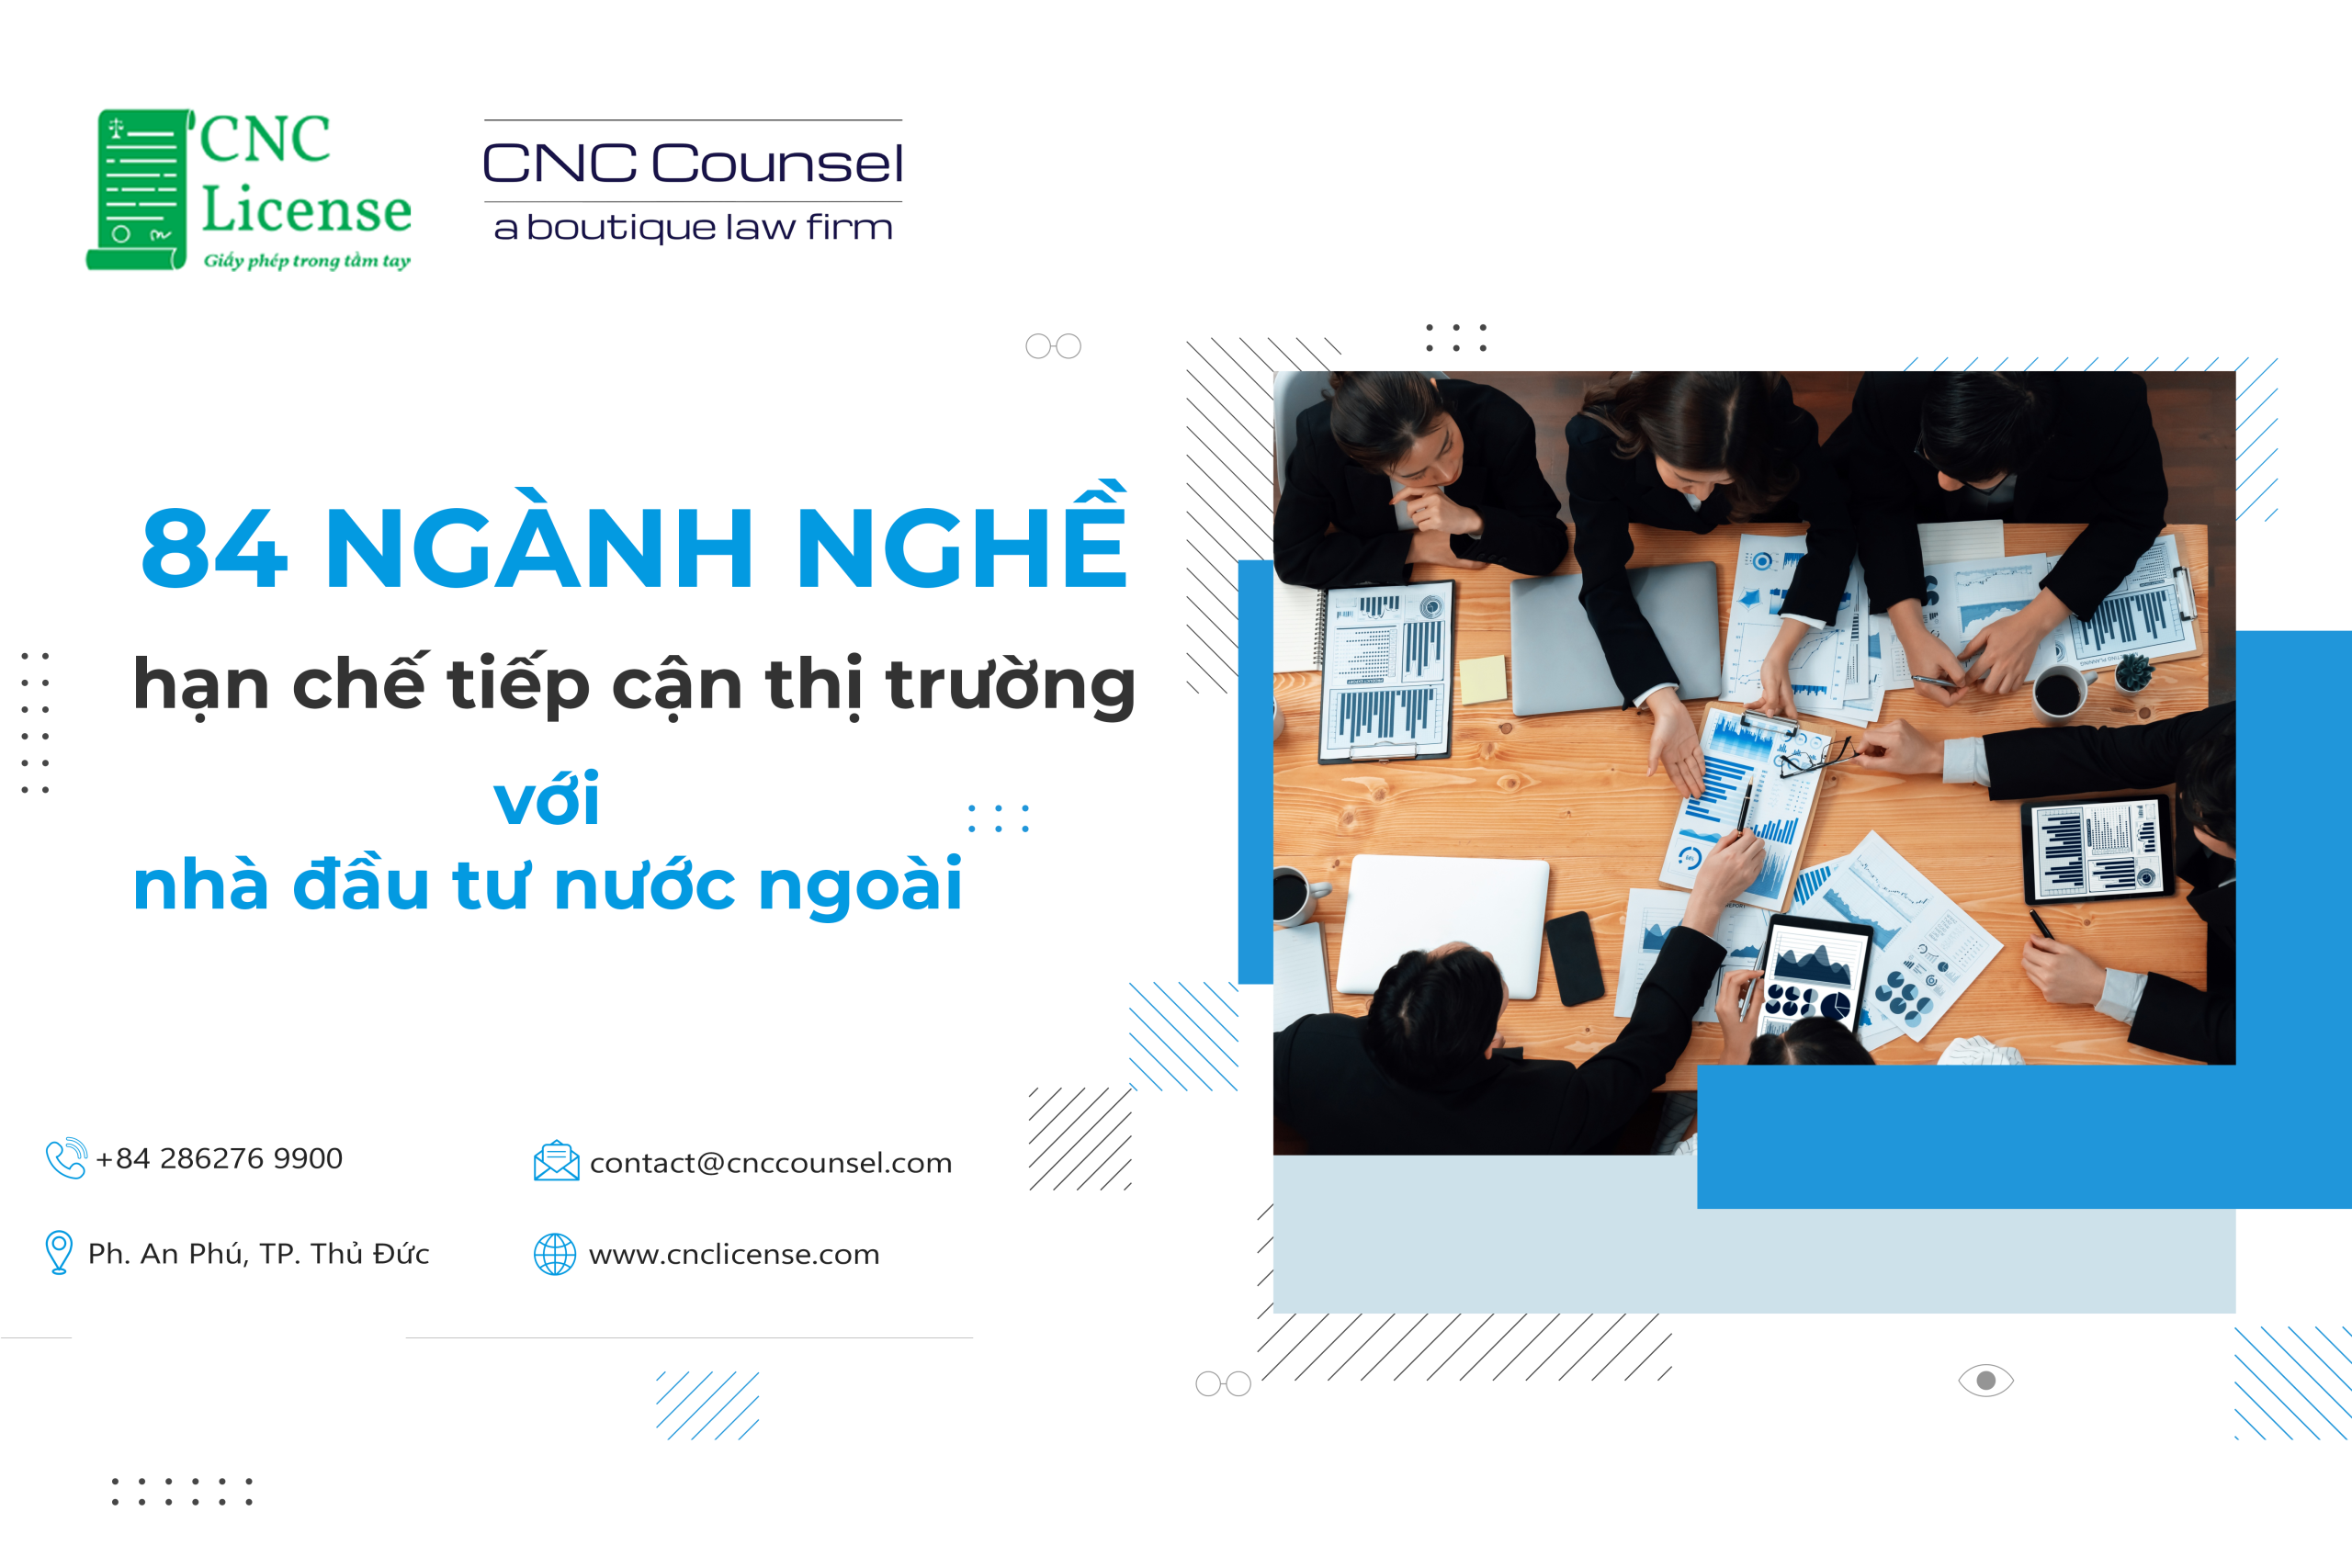 https://cnclicense.com/wp-content/uploads/2023/05/109.84-Nganh-nghe-han-che-tiep-can-thi-truong-voi-nha-dau-tu-nuoc-ngoai.png